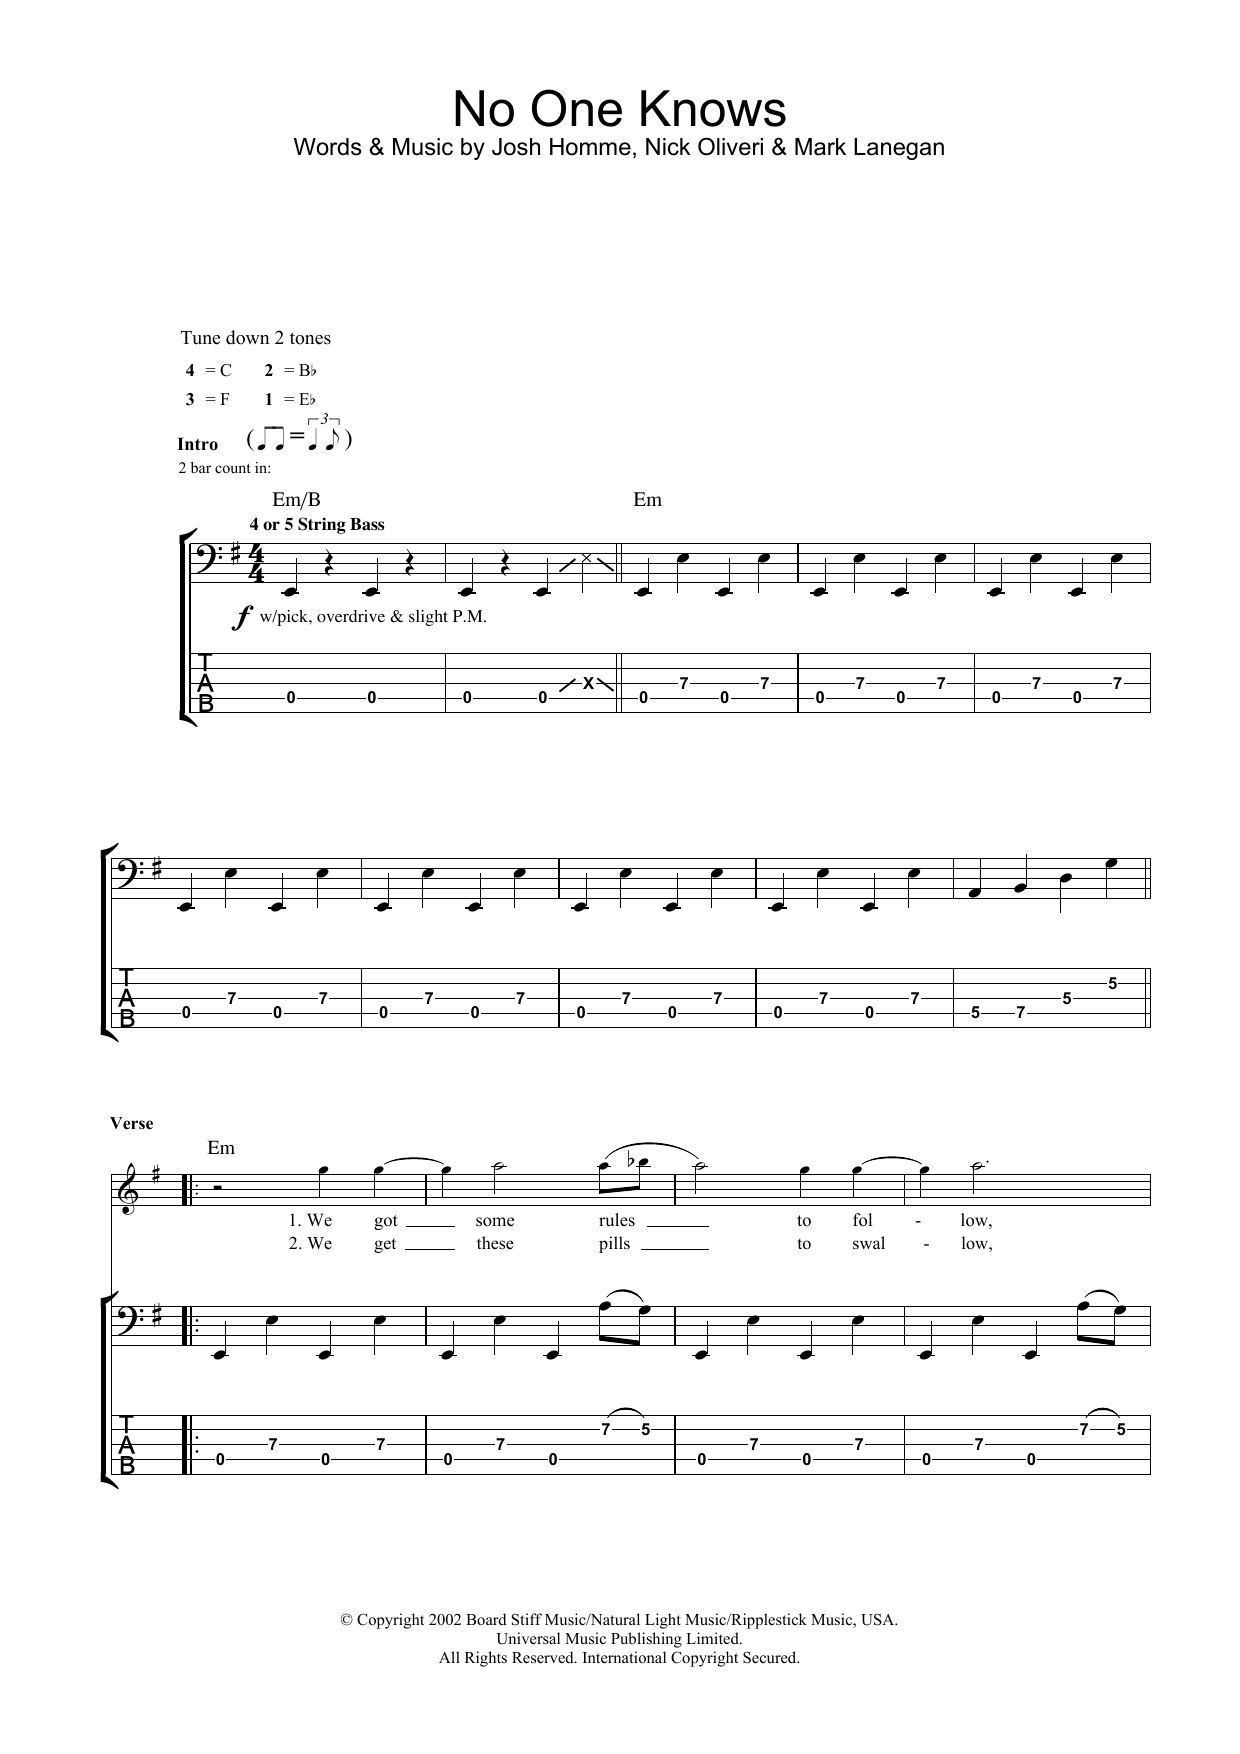 Queens Of The Stone Age No One Knows sheet music notes and chords. Download Printable PDF.